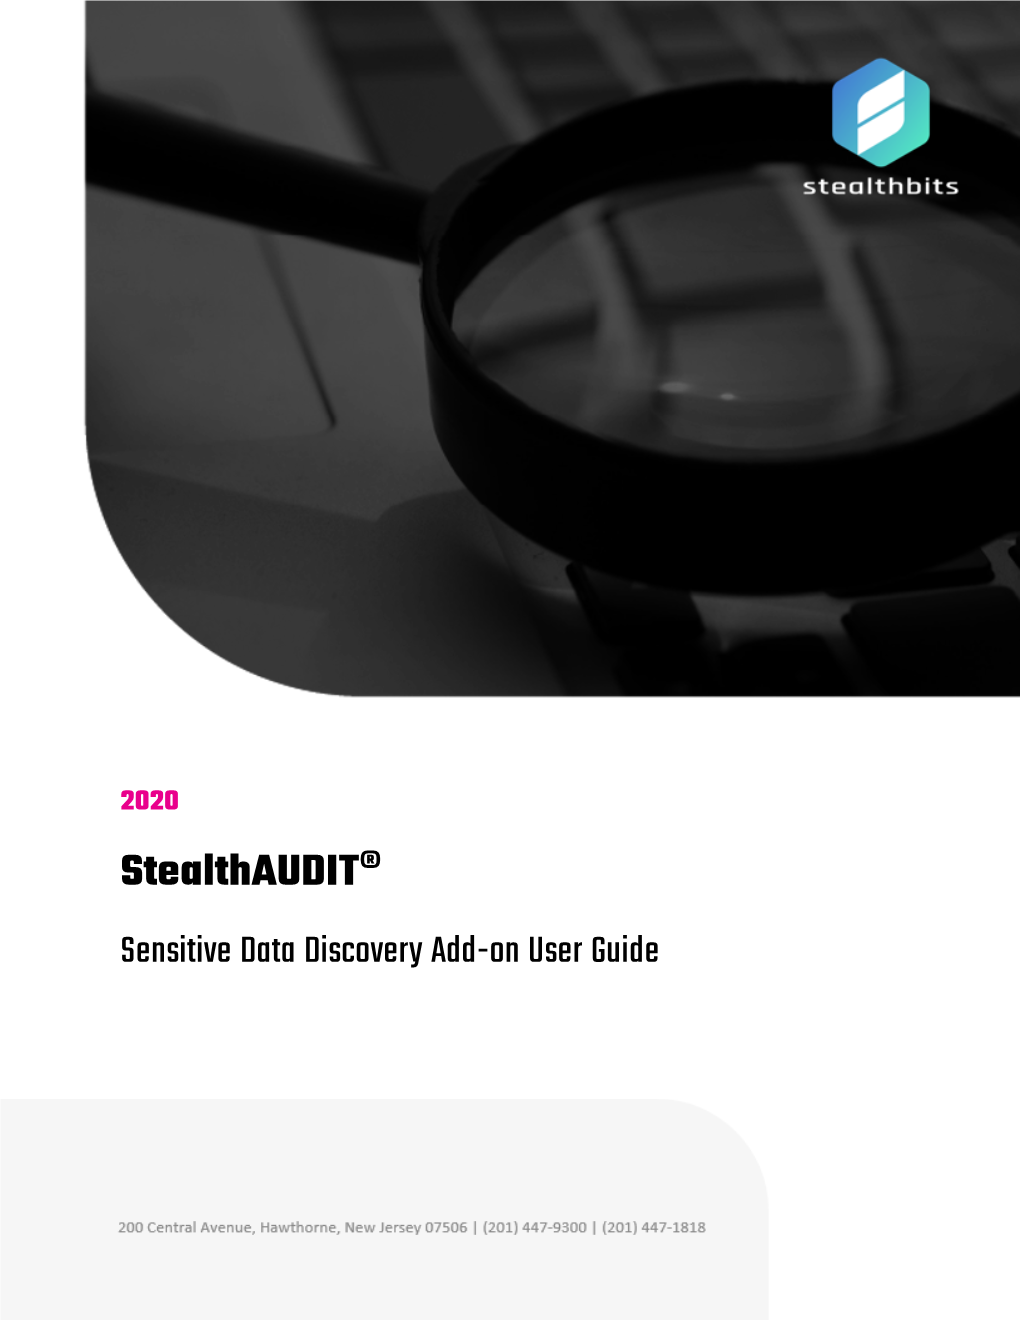 Stealthaudit Sensitive Data Discovery Add-On Installation Guide for Installation Inform- Ation and Prerequisites